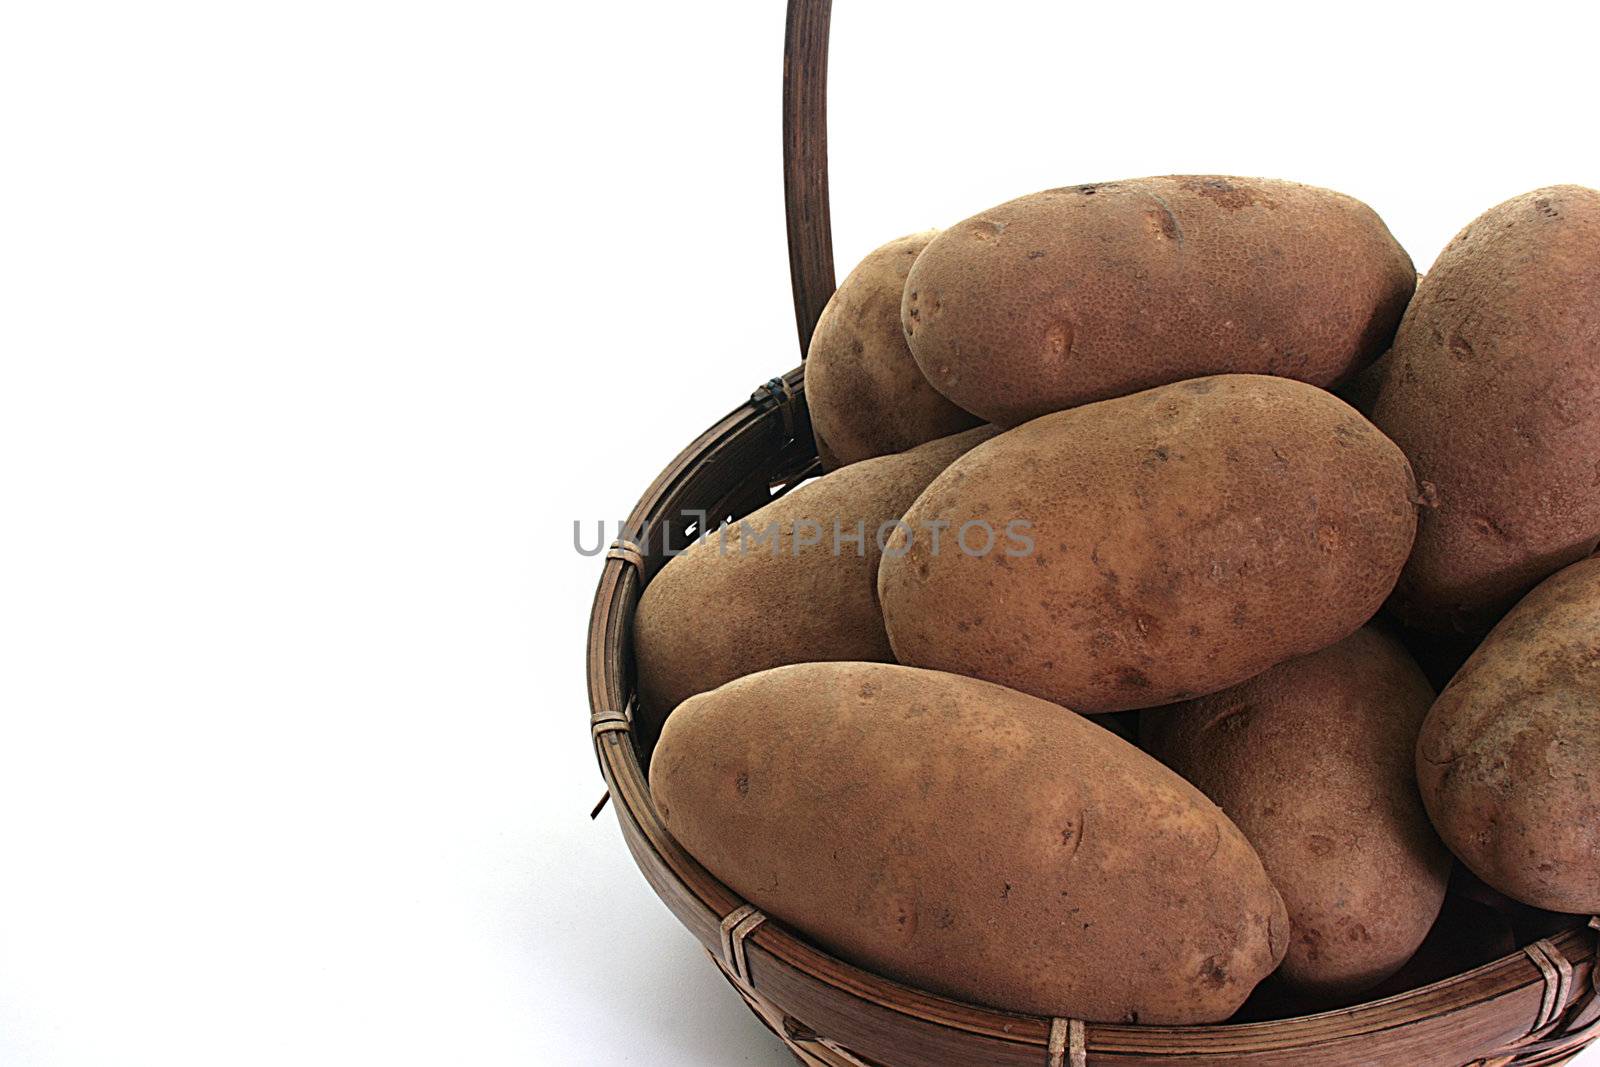 Photos «Potato» are useful for designers and publishers that are doing works on the topic of printed and multimedia presentations, websites, postcards, calendars, professional advertising etc.